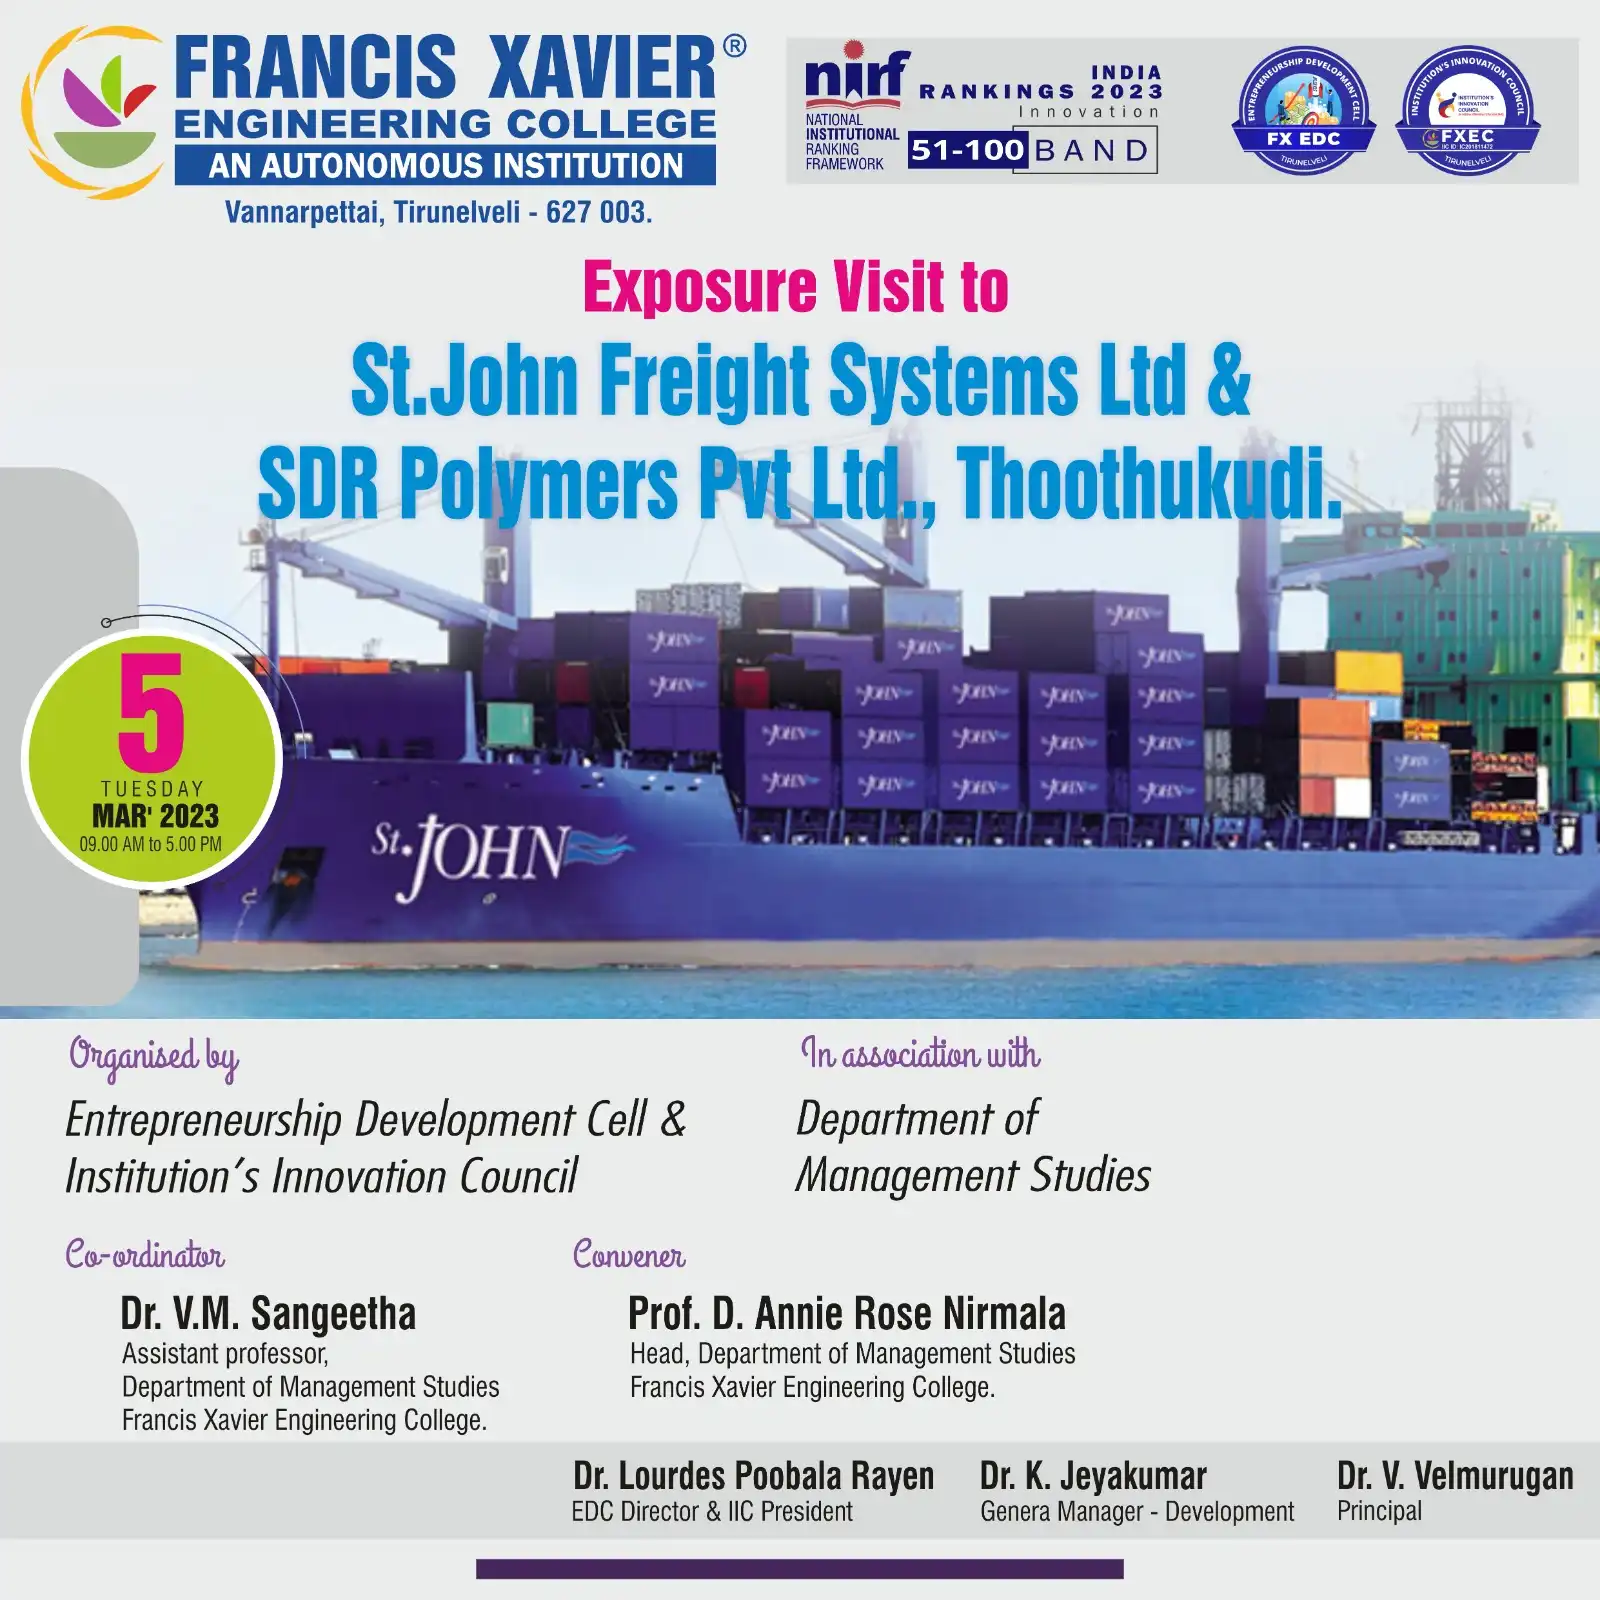 EXPOSURE VISIT TO St.John Freight Systems Ltd and SDR Polymers